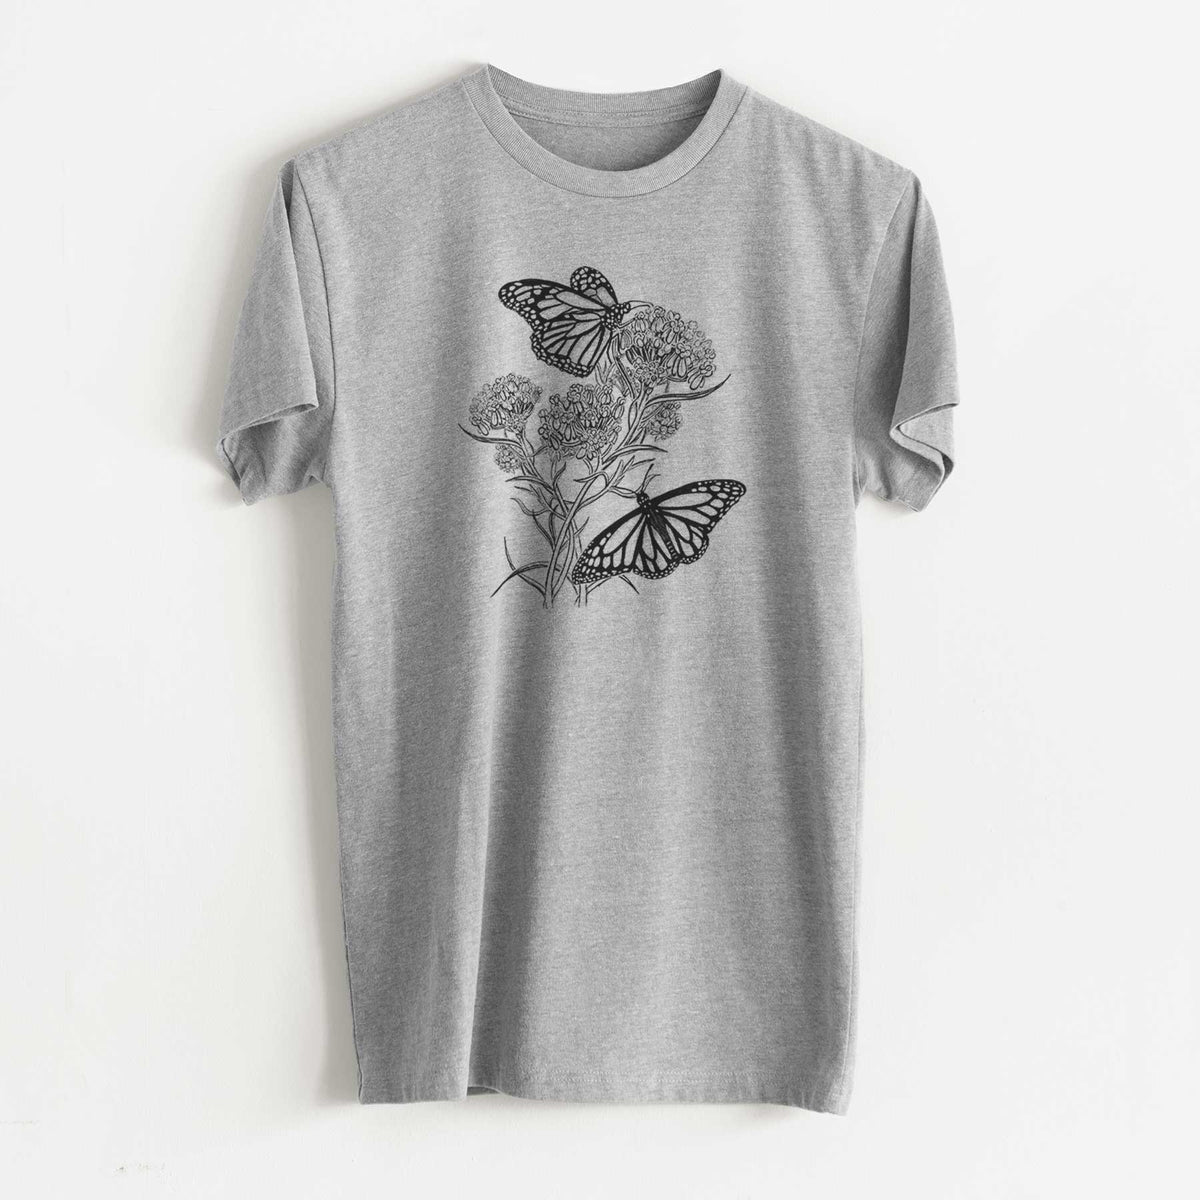 Narrowleaf Milkweed with Monarchs - Unisex Recycled Eco Tee  - CLOSEOUT - FINAL SALE